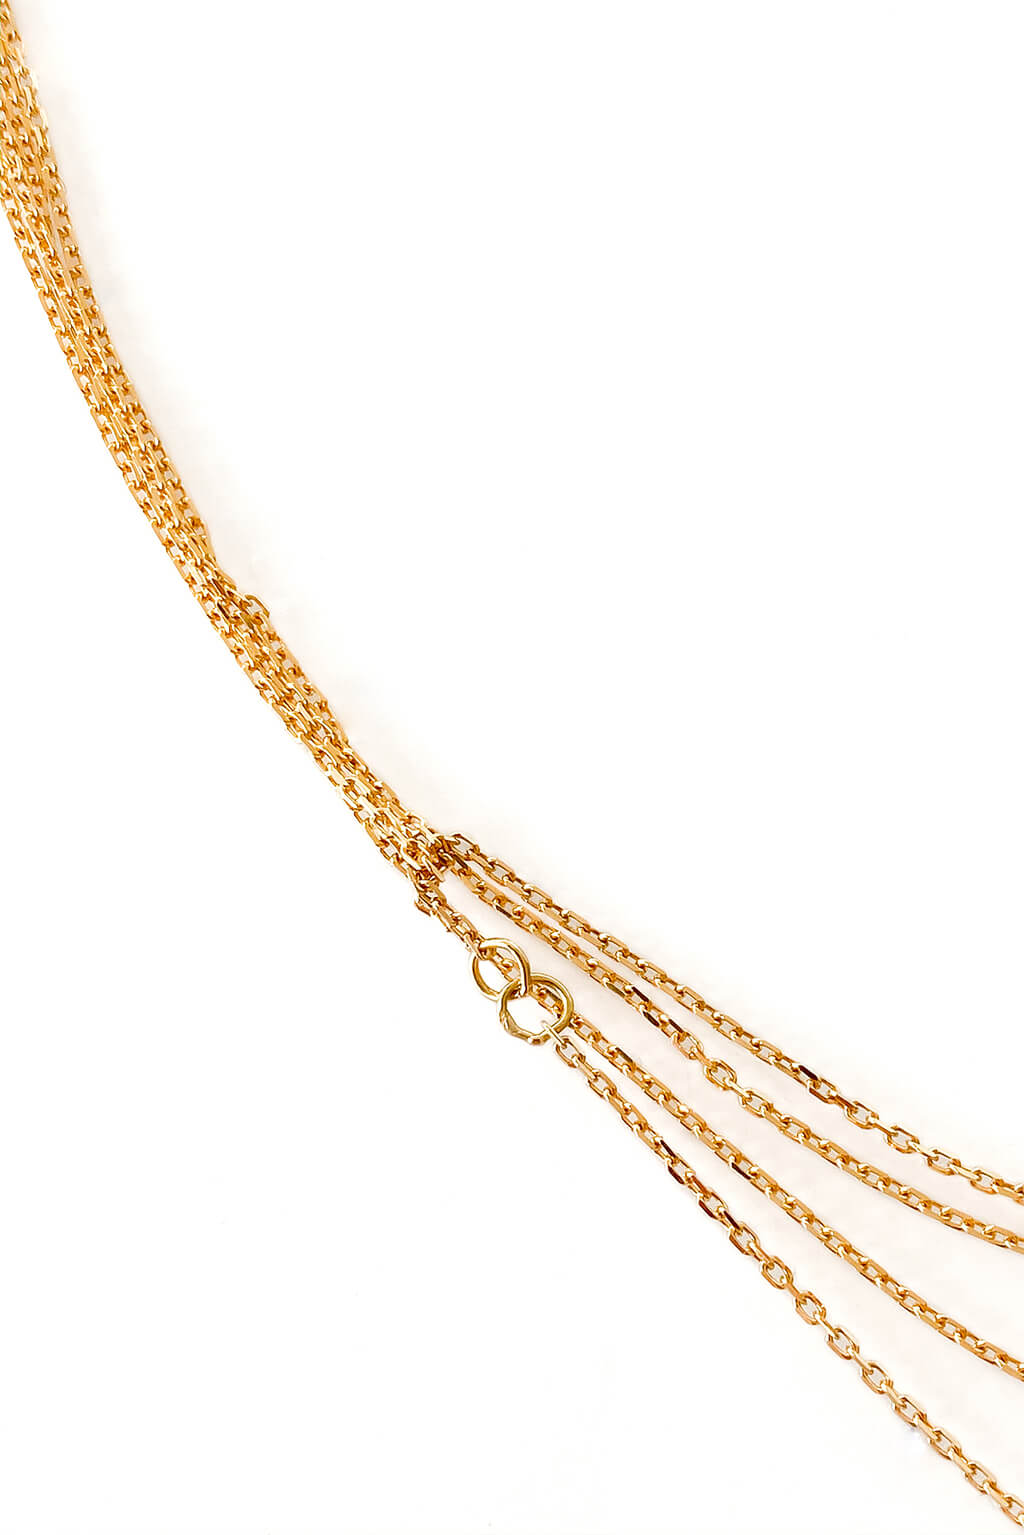 Three Chains gold necklace